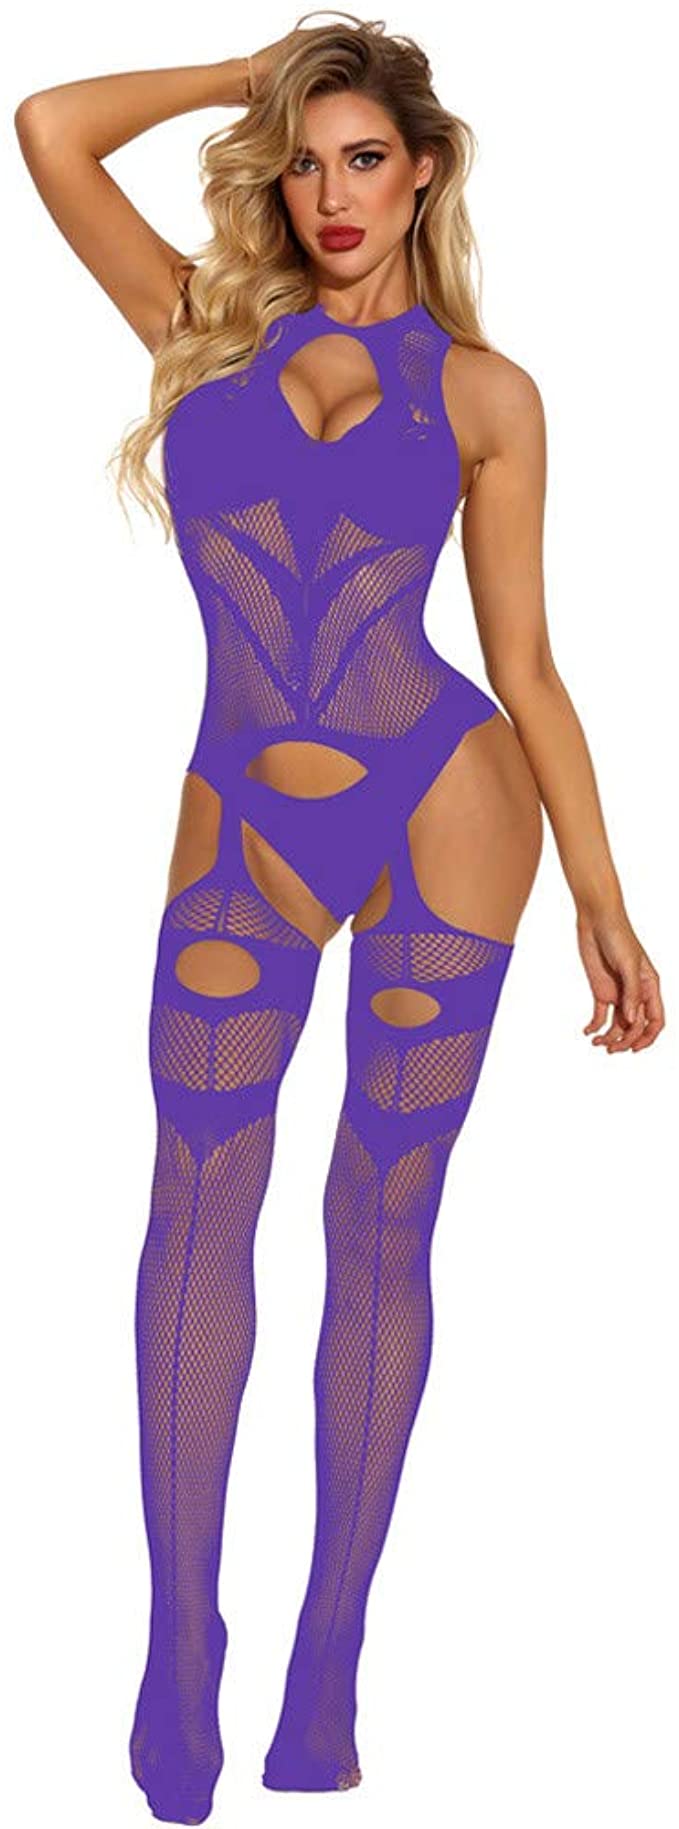 Women's See Through Lingerie Crotch Lace Babydoll Sexy Lingerie for Women One Piece Bodysuit